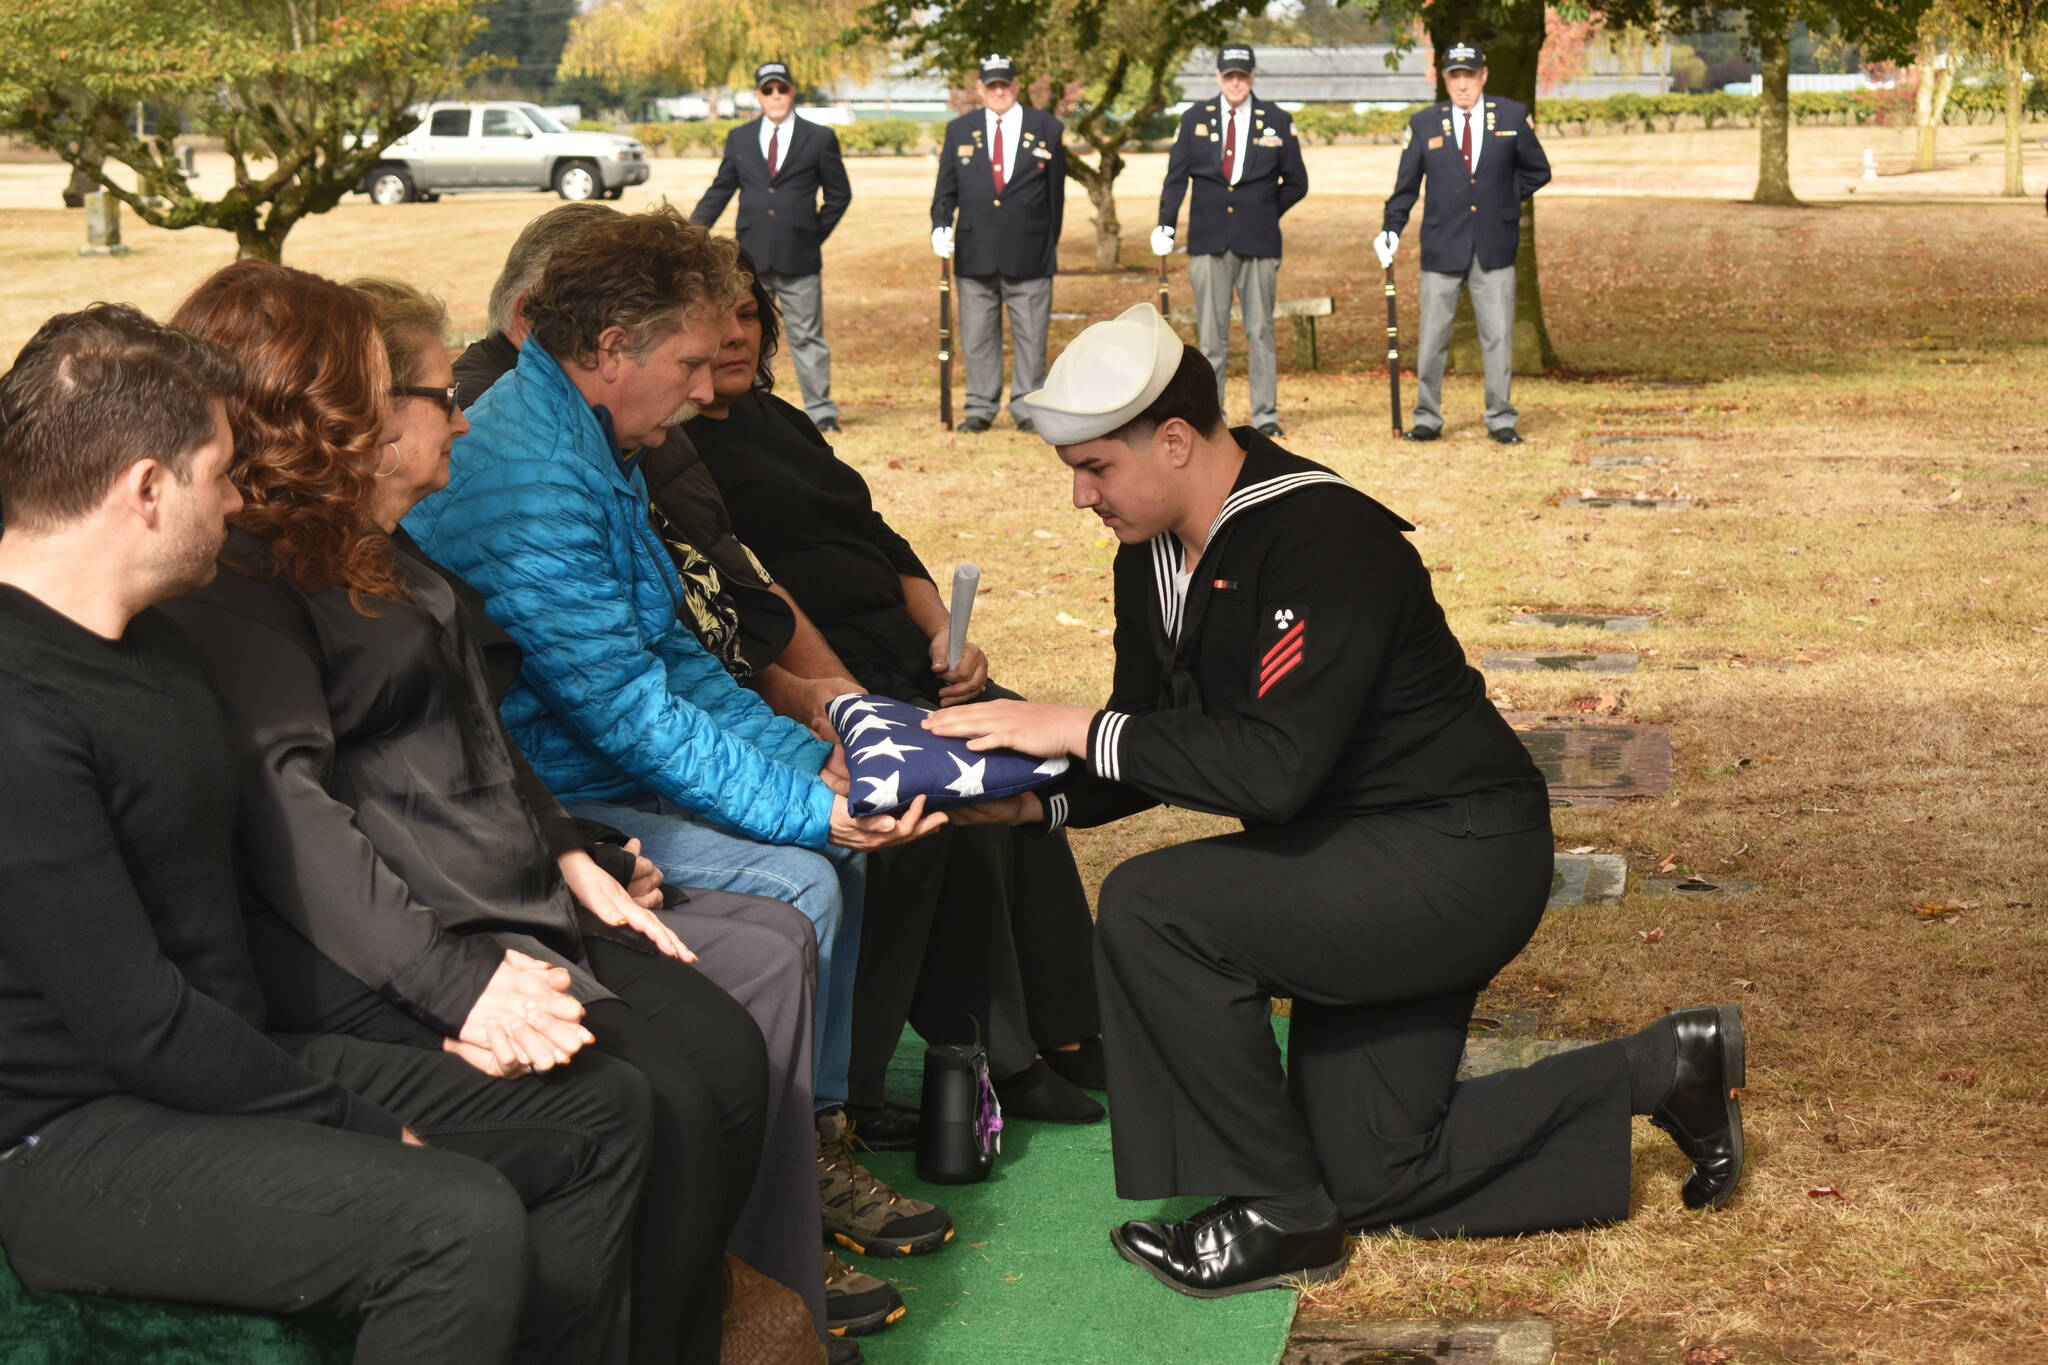 In these photos, two young men in their Naval service uniforms fold and present a United States flag to Jeff Jagosh, one of the children of the recently deceased Enumclaw couple Joseph and LaDonna Jagosh. Joe, a Korean War veteran who served on the USS Bremerton-130 during the Blockade of Wonsan, was given military honors during a ceremony with the family Friday at Enumclaw Evergreen Memorial Park, including the playing of Taps and a gun salute. VFW Honor Guard Chair Al Zarb led the local VFW Post 1949 in the ceremony. LaDonna died this June at the age of 84, and Joseph died a few weeks later at 89; the two were married for 65 years. They will be buried at the cemetery with their son Dan, who died at the age of 20.